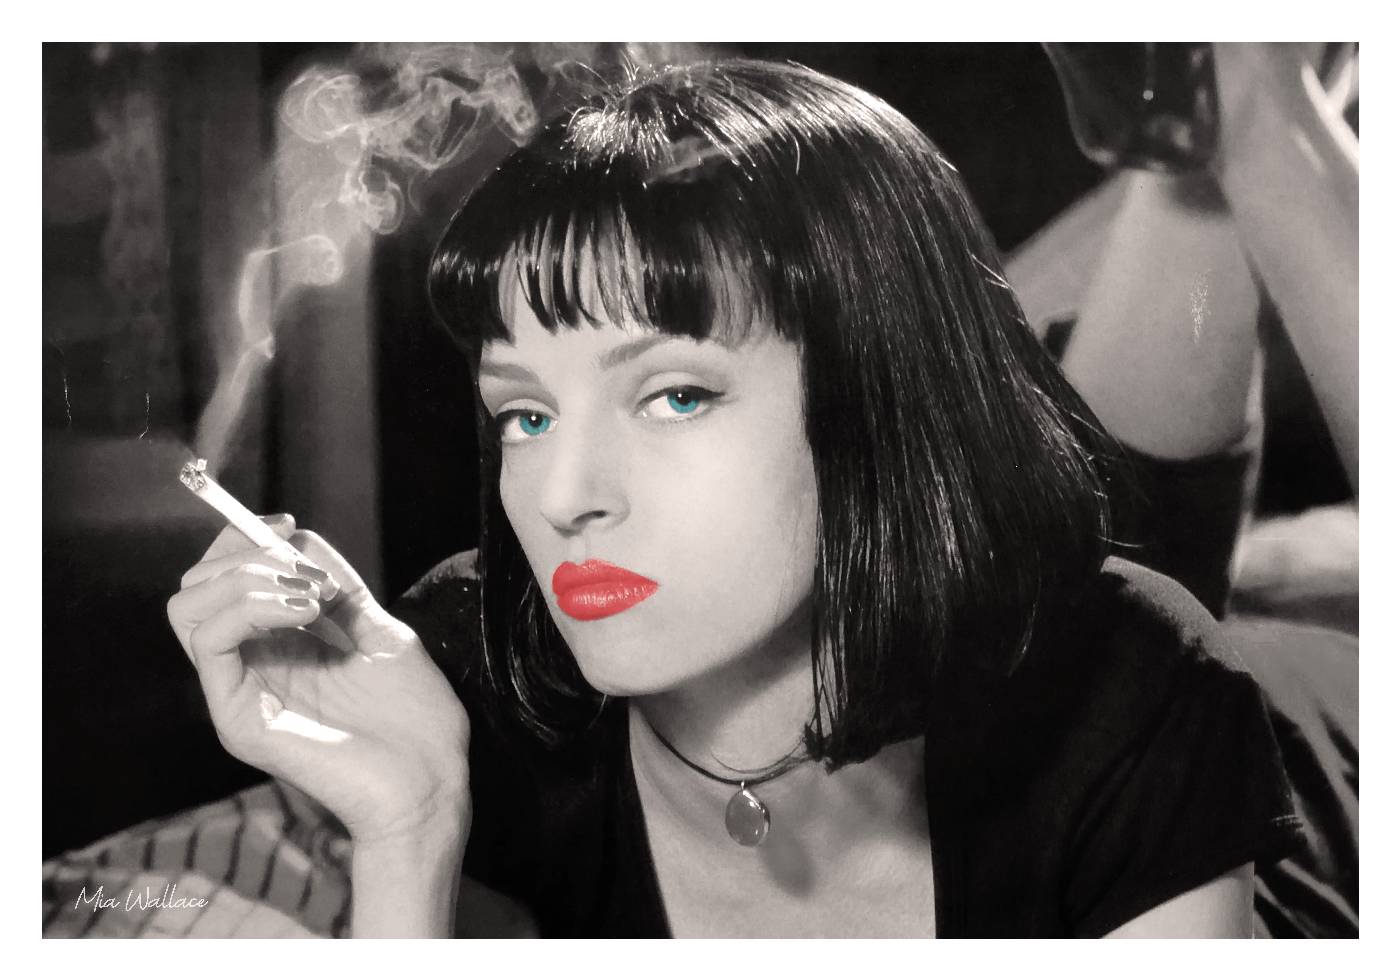 Pulp Fiction Is 25: British Vogue Talks To Costume Designer Betsy Heimann  About Creating Looks For Uma Thurman As Mia Wallace | British Vogue